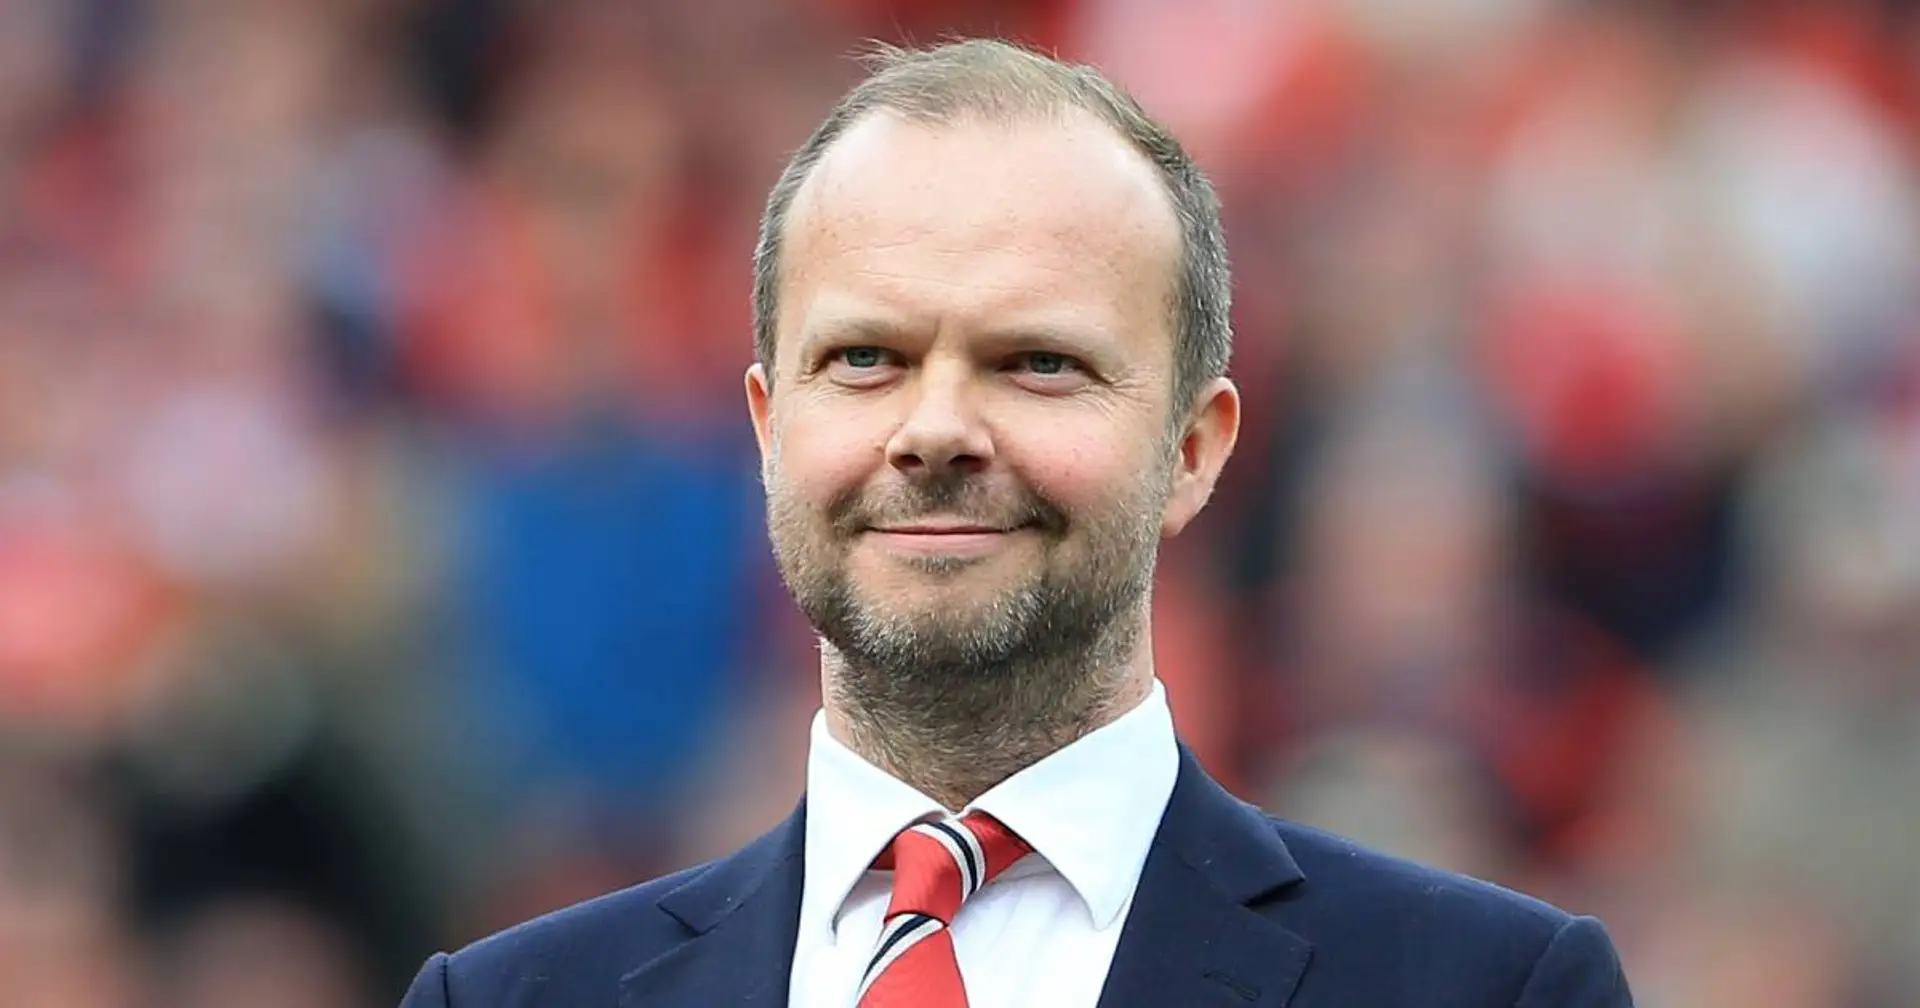 Ed Woodward lands new job a year after leaving Man United